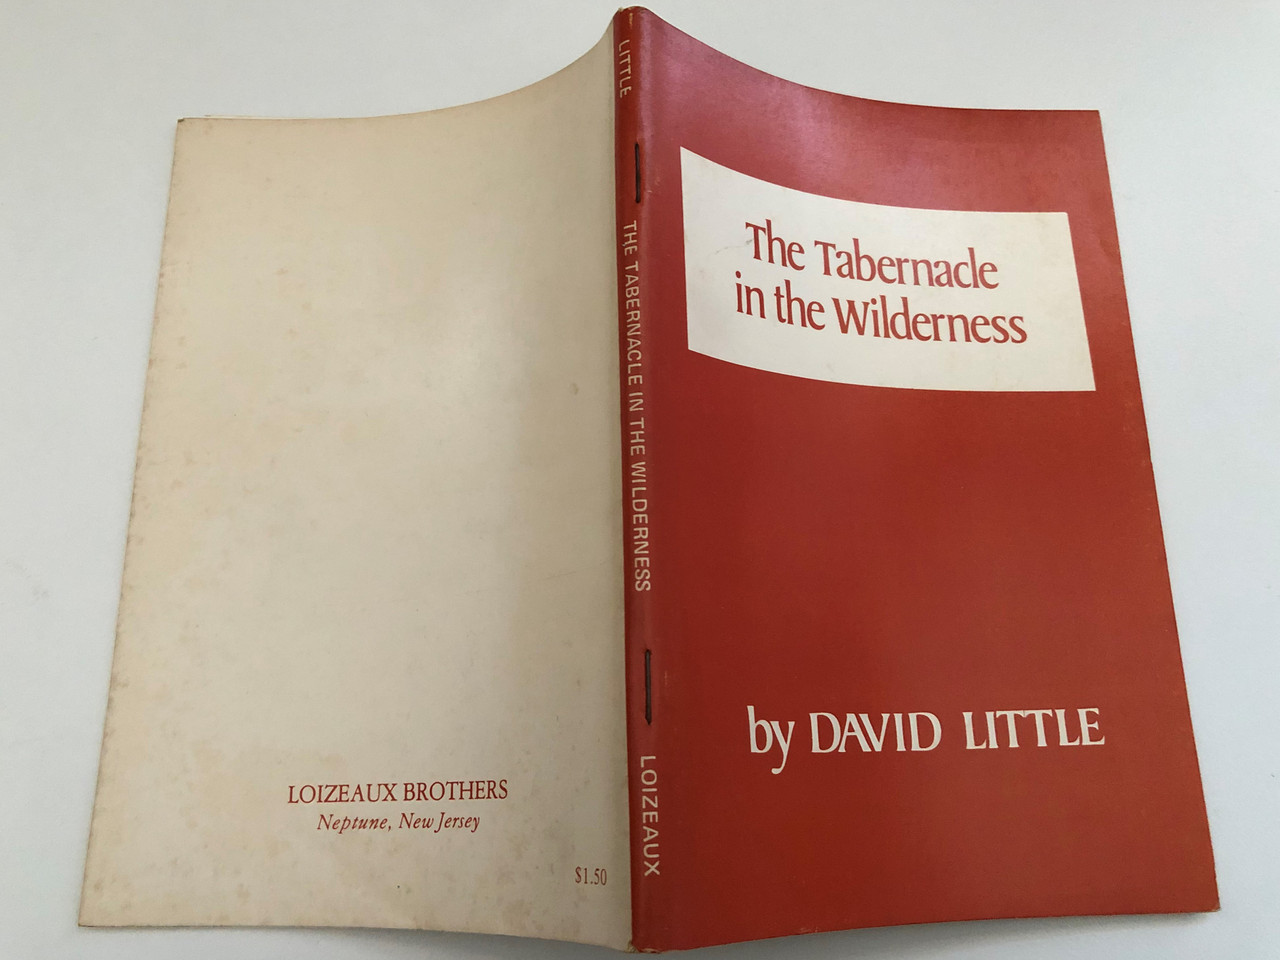 https://cdn10.bigcommerce.com/s-62bdpkt7pb/products/53518/images/271492/The_Tabernacle_in_the_Wilderness_by_David_Little_Loizeaux_Brothers_1982_Printed_in_United_States_of_America_872135219__59714.1680196577.1280.1280.JPG?c=2&_gl=1*pco74w*_ga*MzA5MjcwMDY5LjE2Nzk3NDk1MDE.*_ga_WS2VZYPC6G*MTY4MDE3NjQ4NS41LjEuMTY4MDE5NjYzNS4yOS4wLjA.